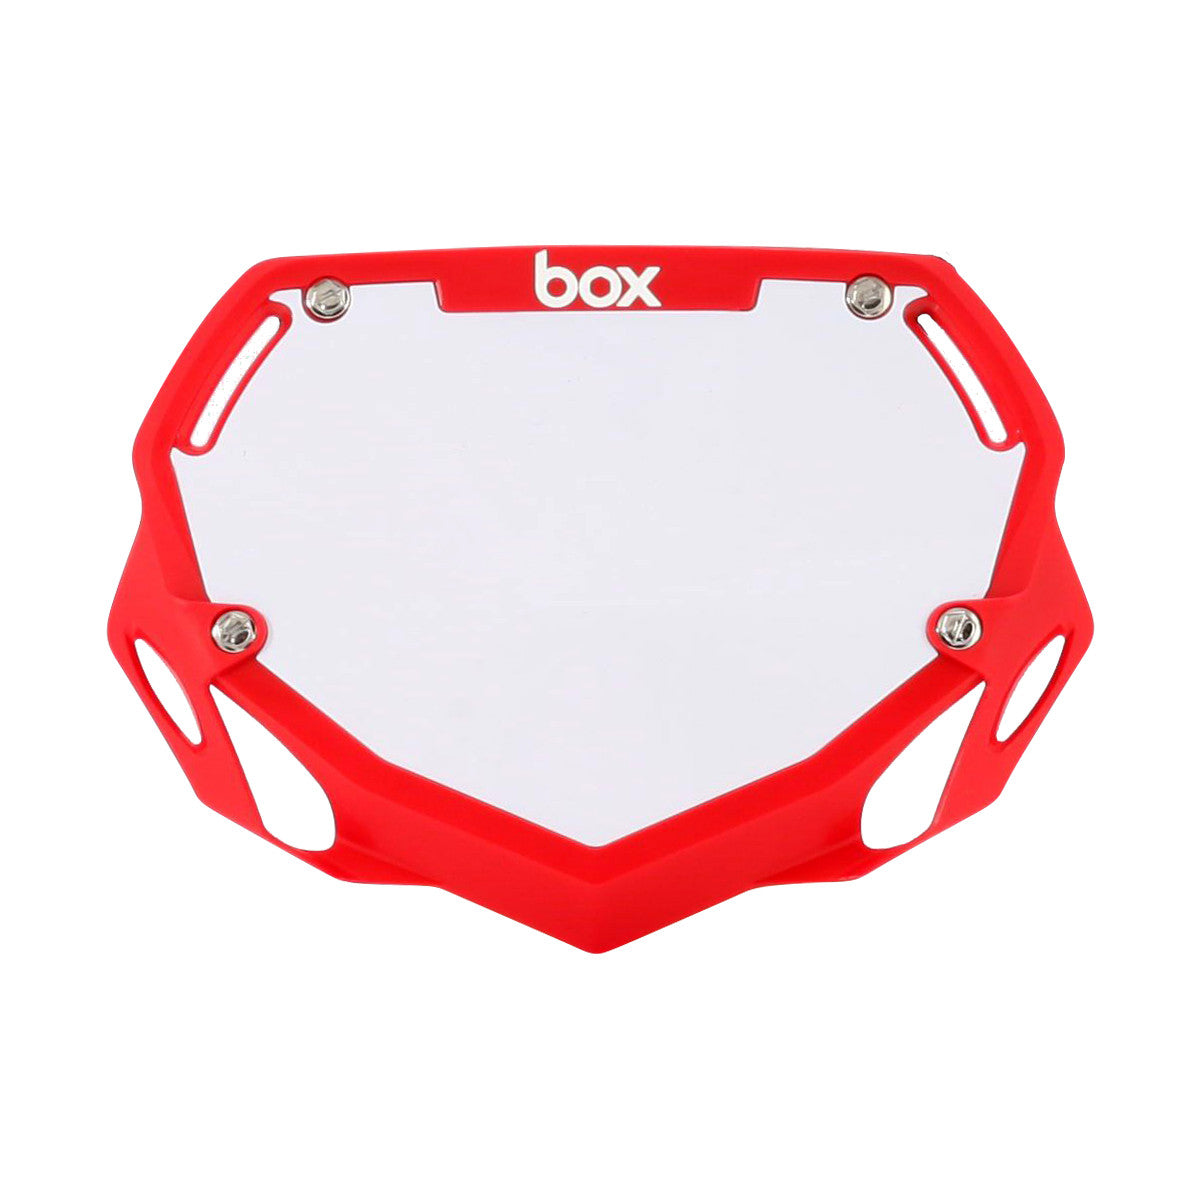 Box Two Mini / Cruiser BMX Number Plate - Red + White